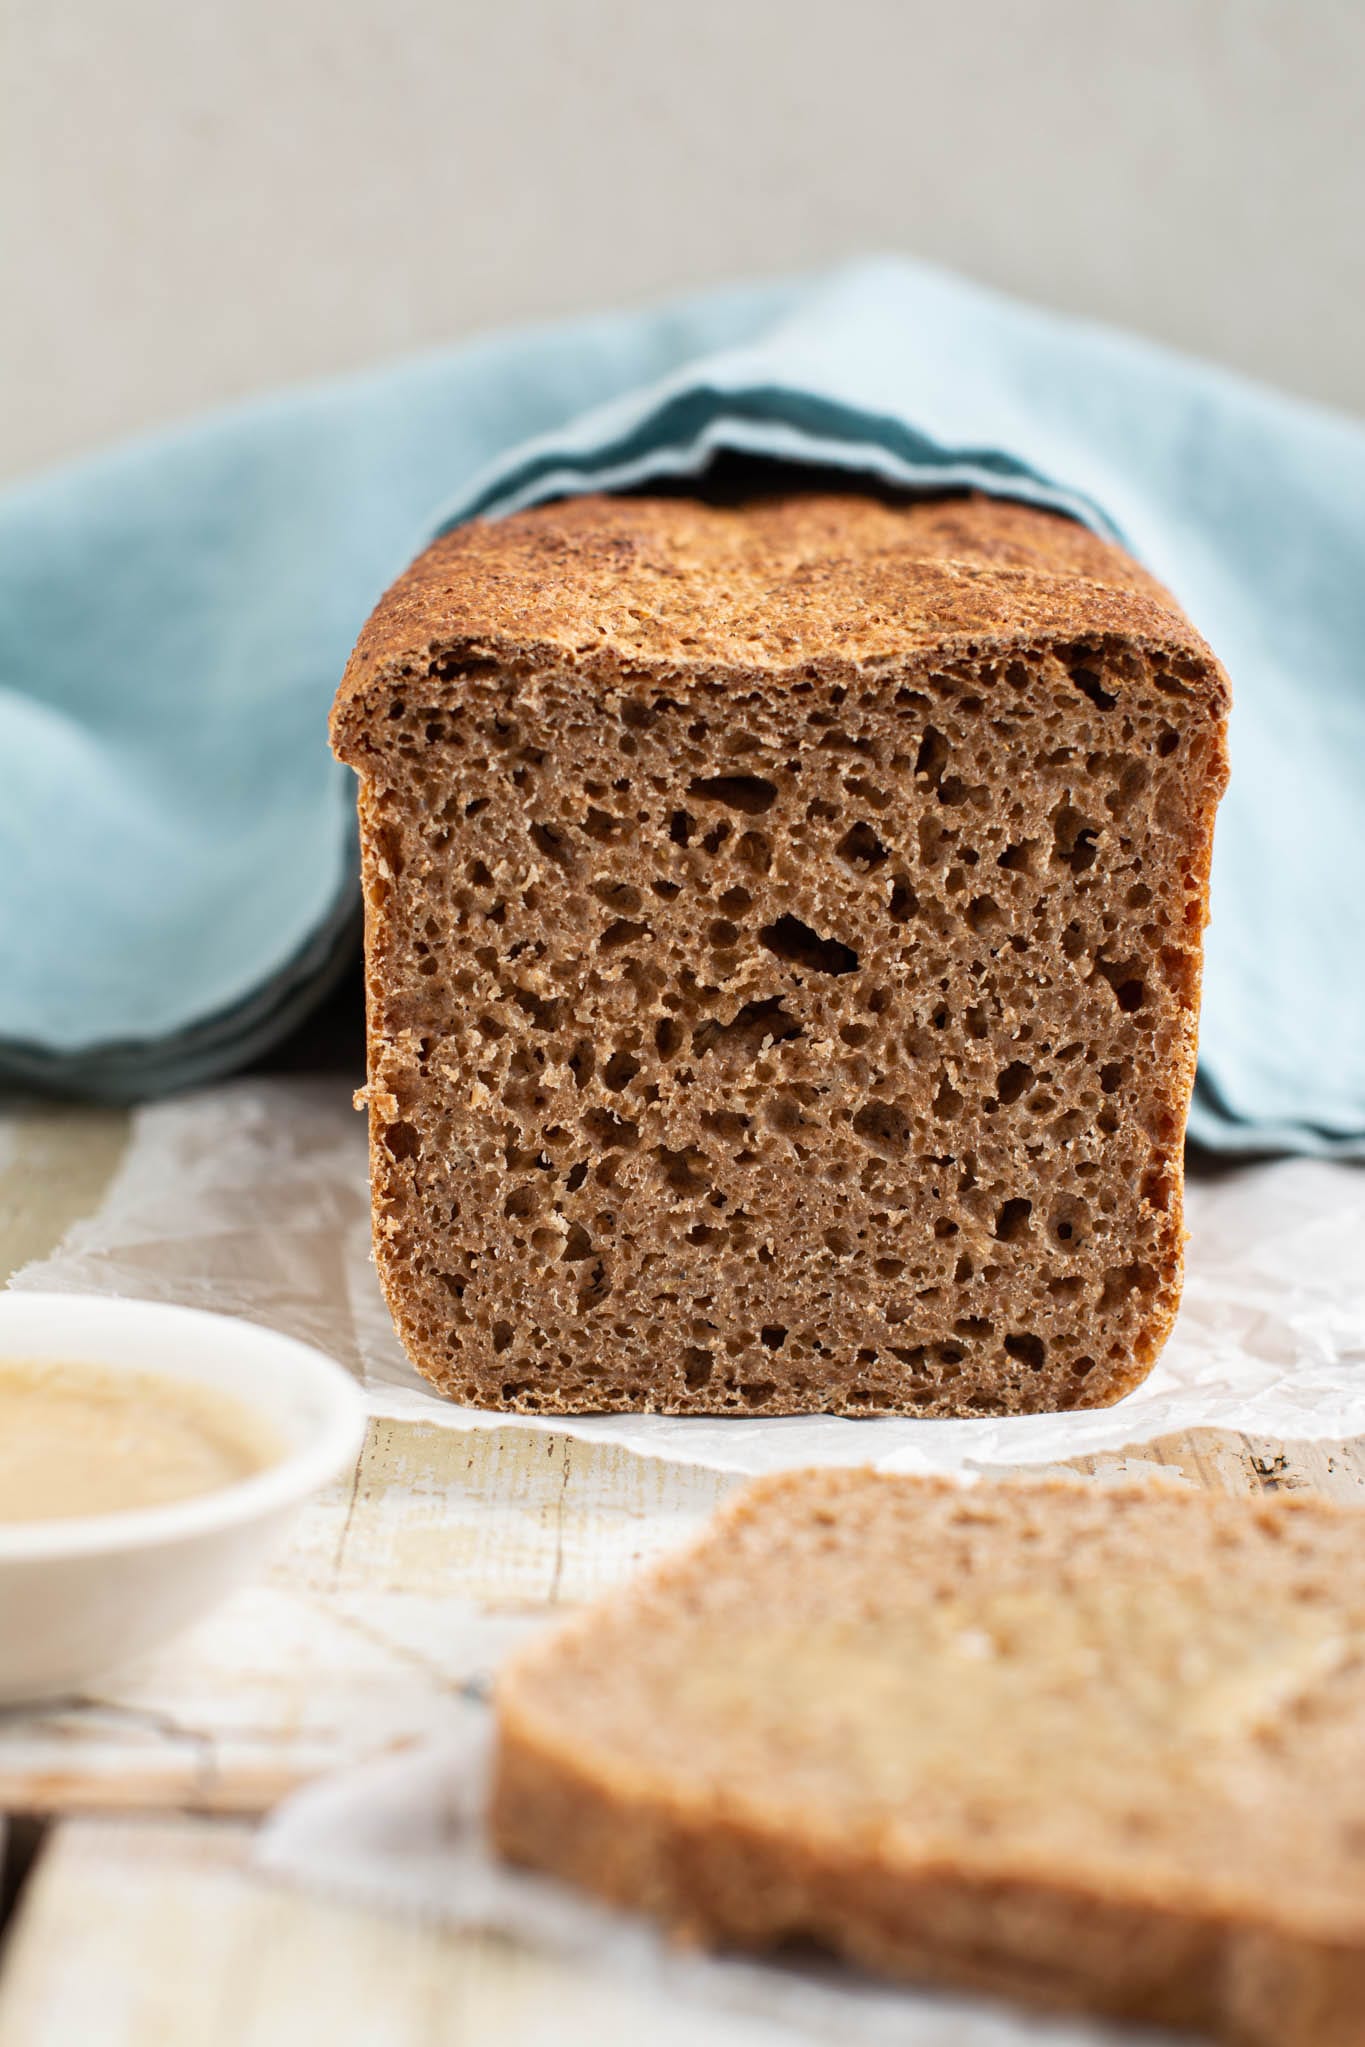 Learn how to make no-knead whole grain spelt sourdough bread with simple equipment in only 8 hours.